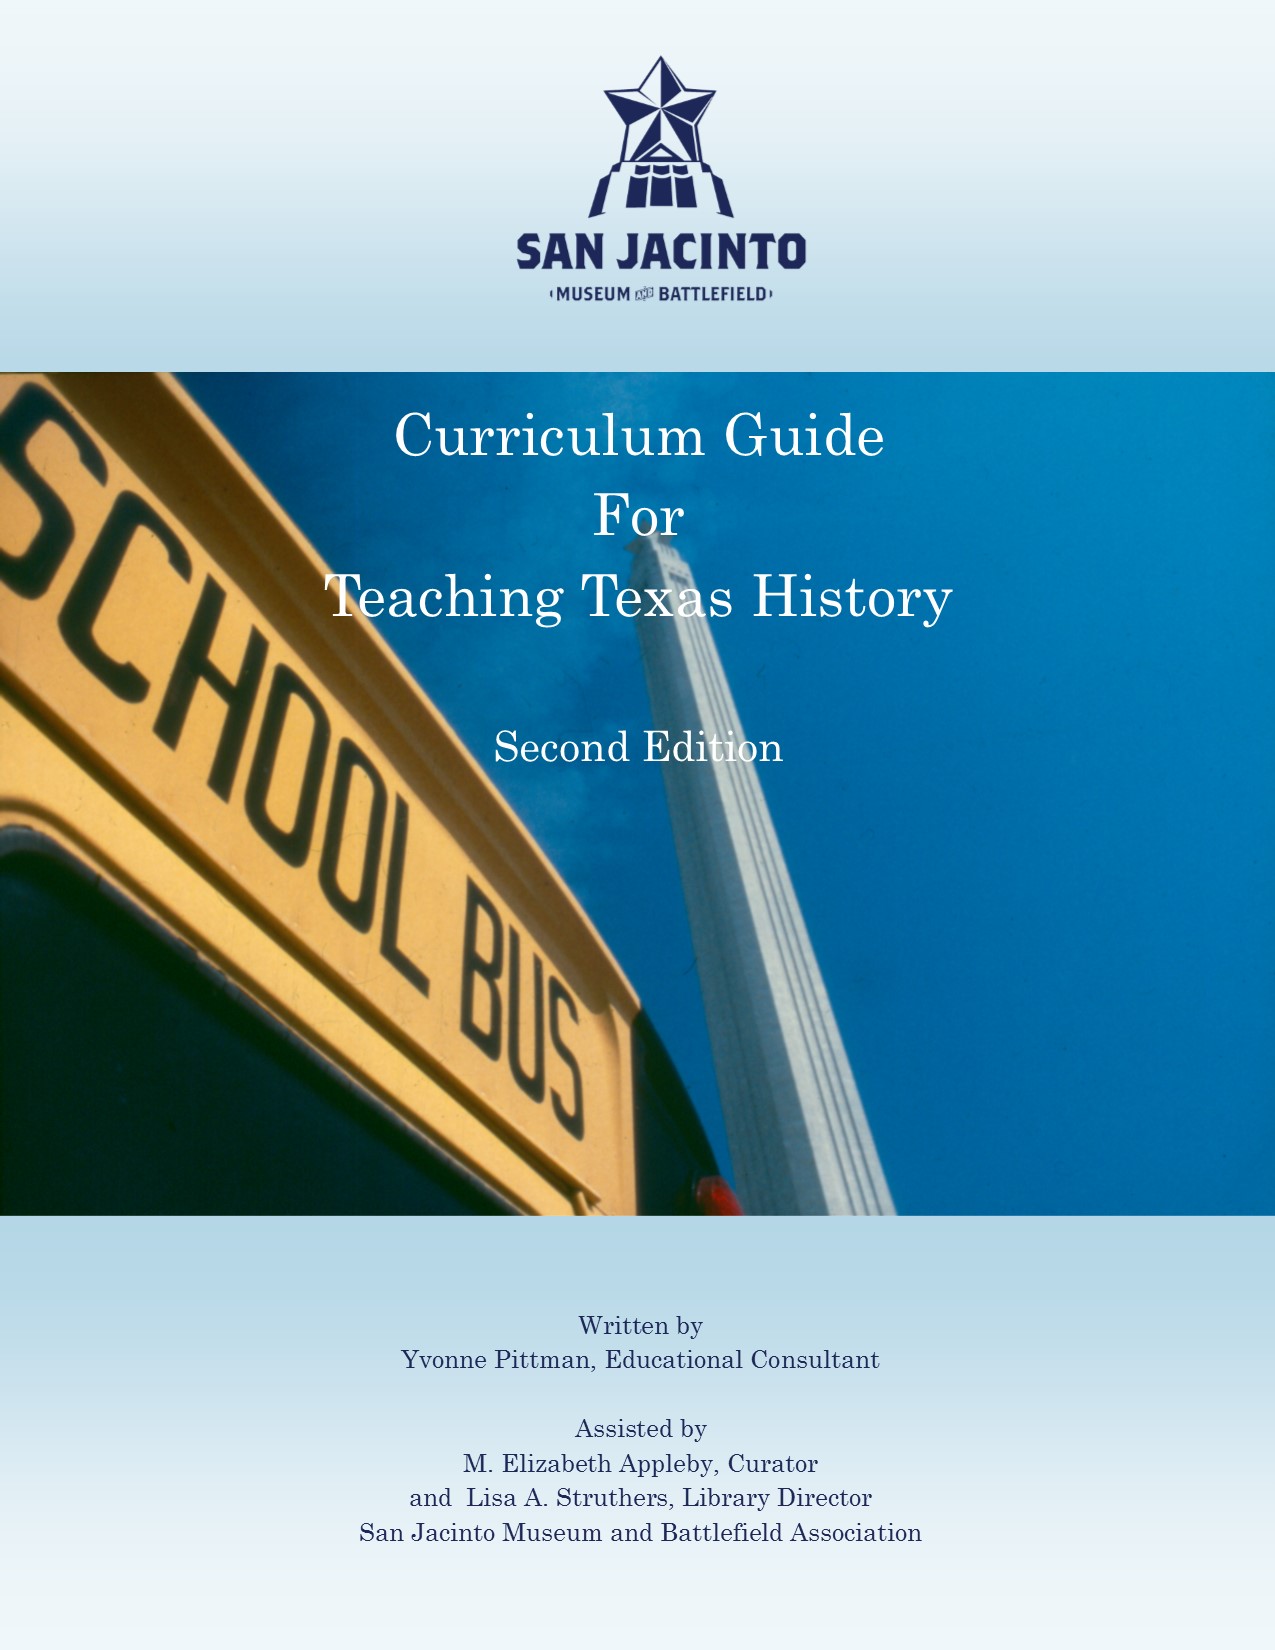 The cover of the Curriculm guide for Texas History from San Jacinto